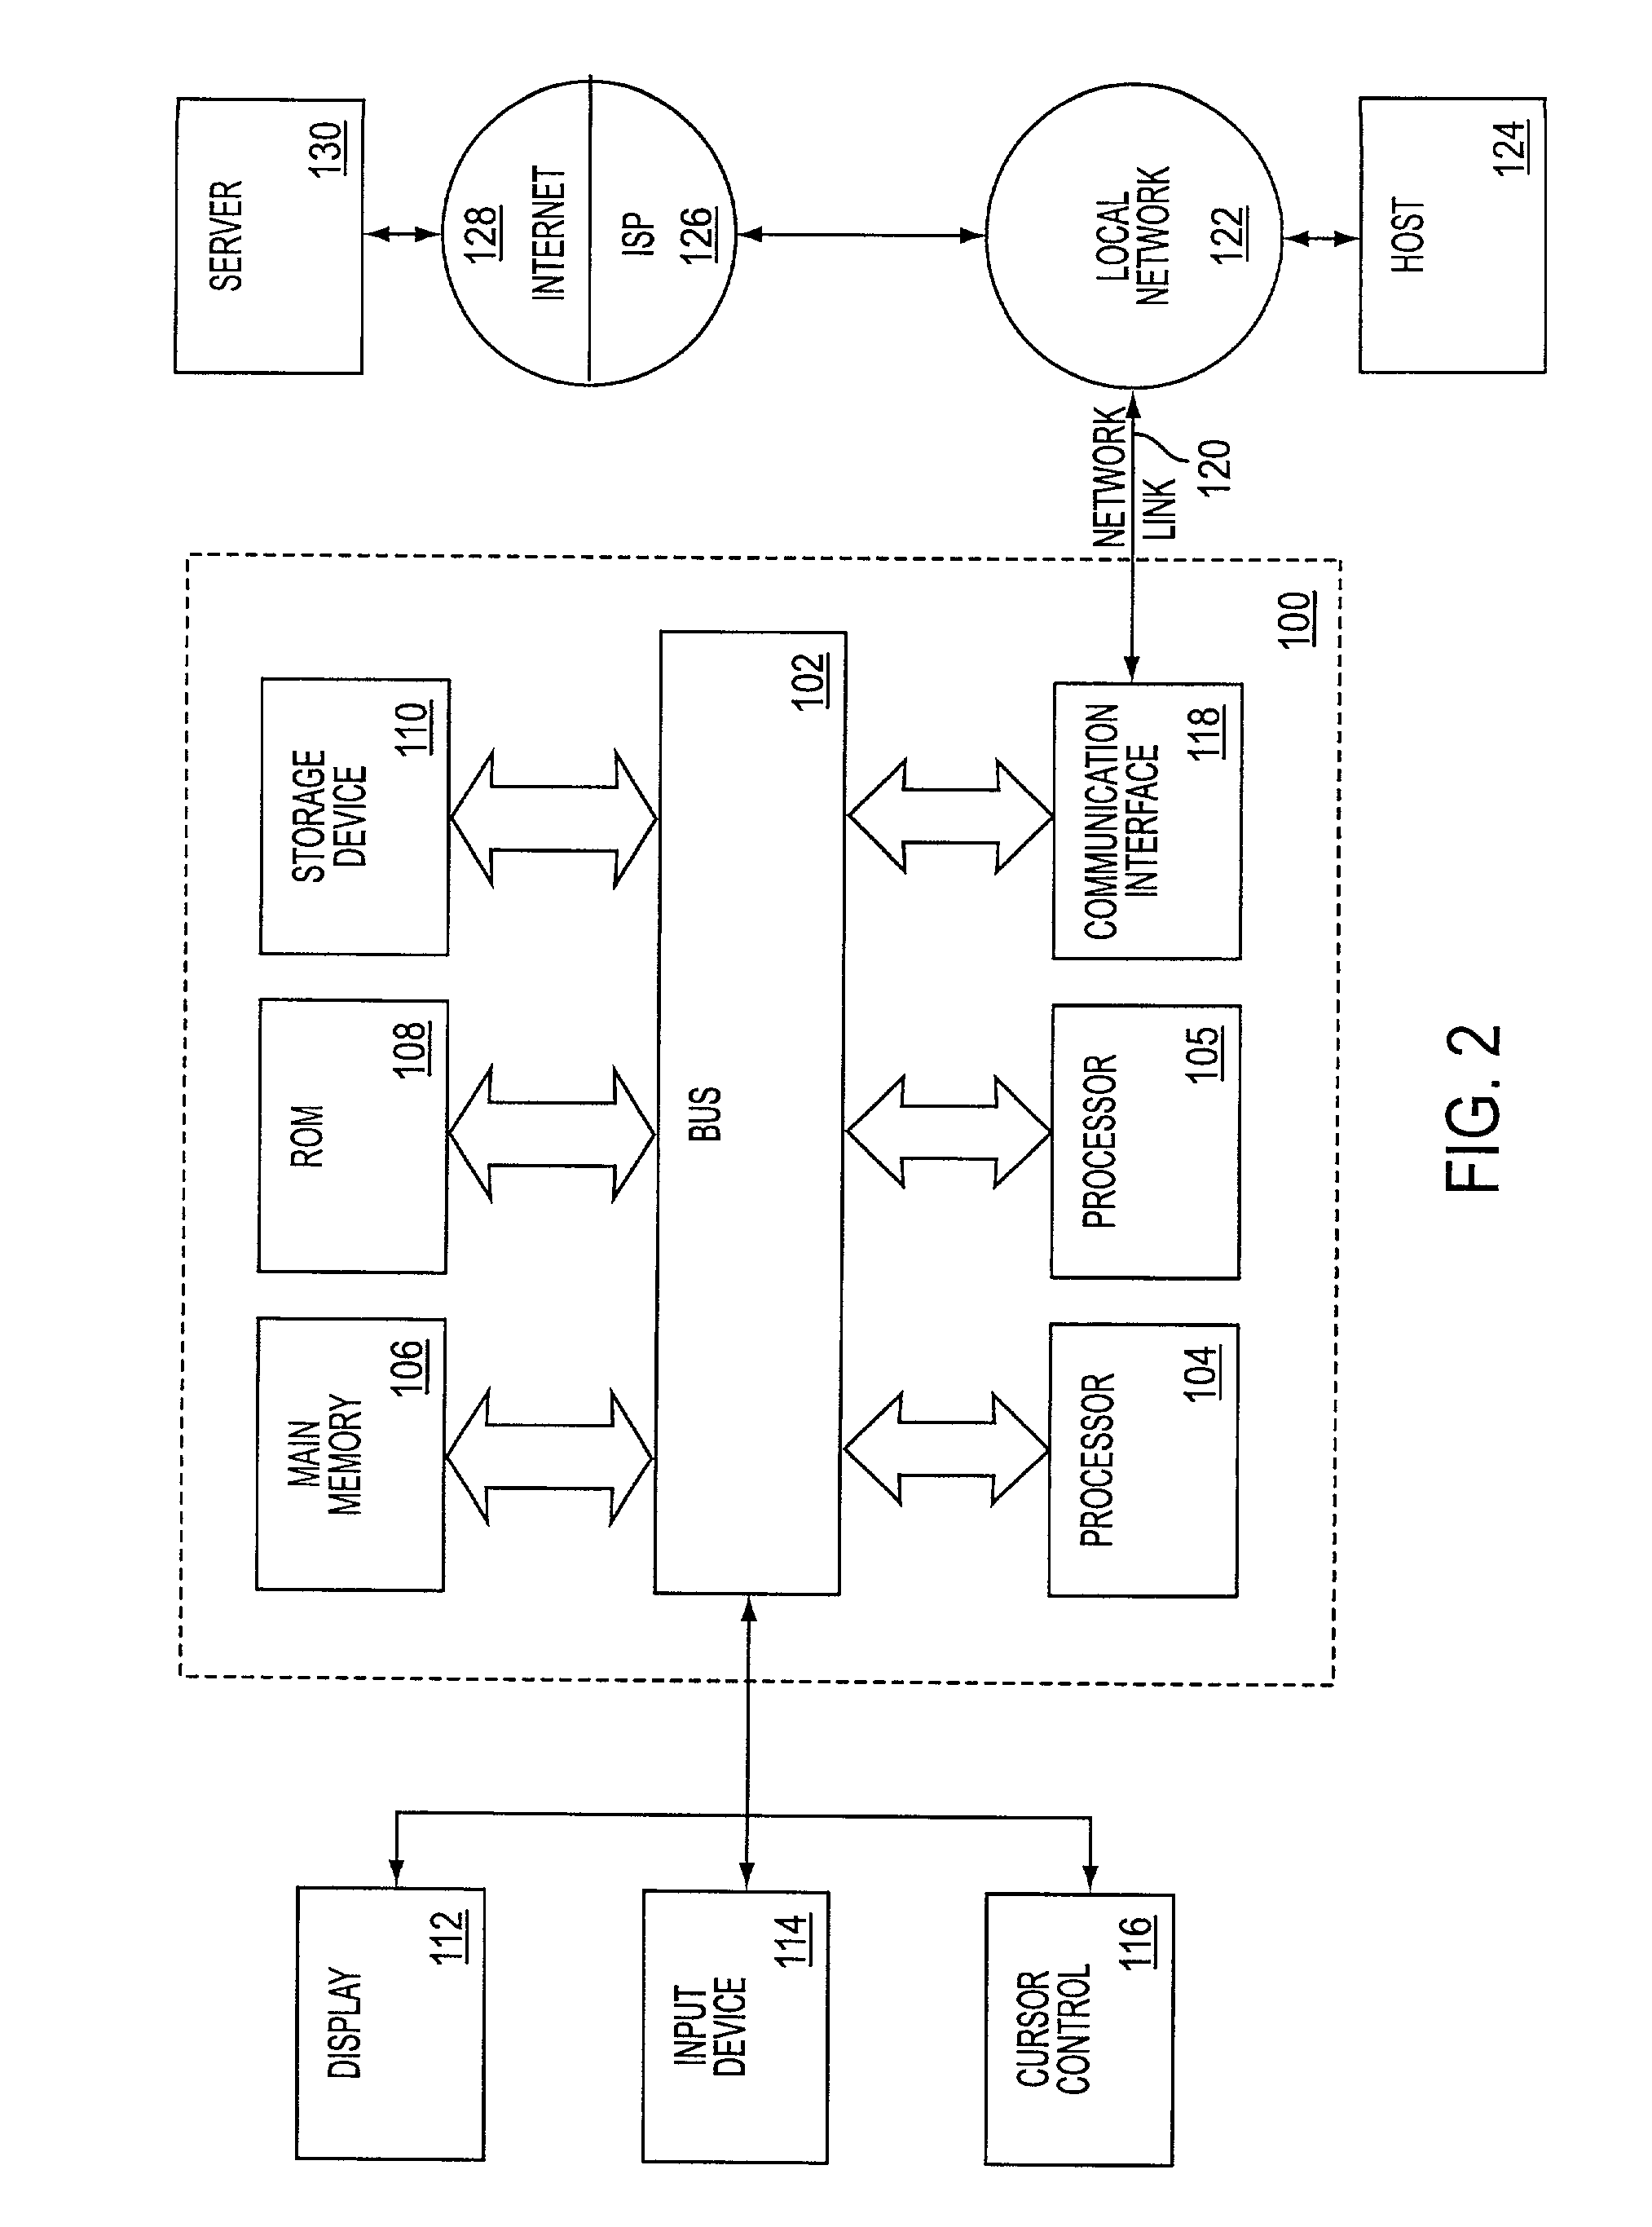 Method and system for matching potential employees and potential employers over a network